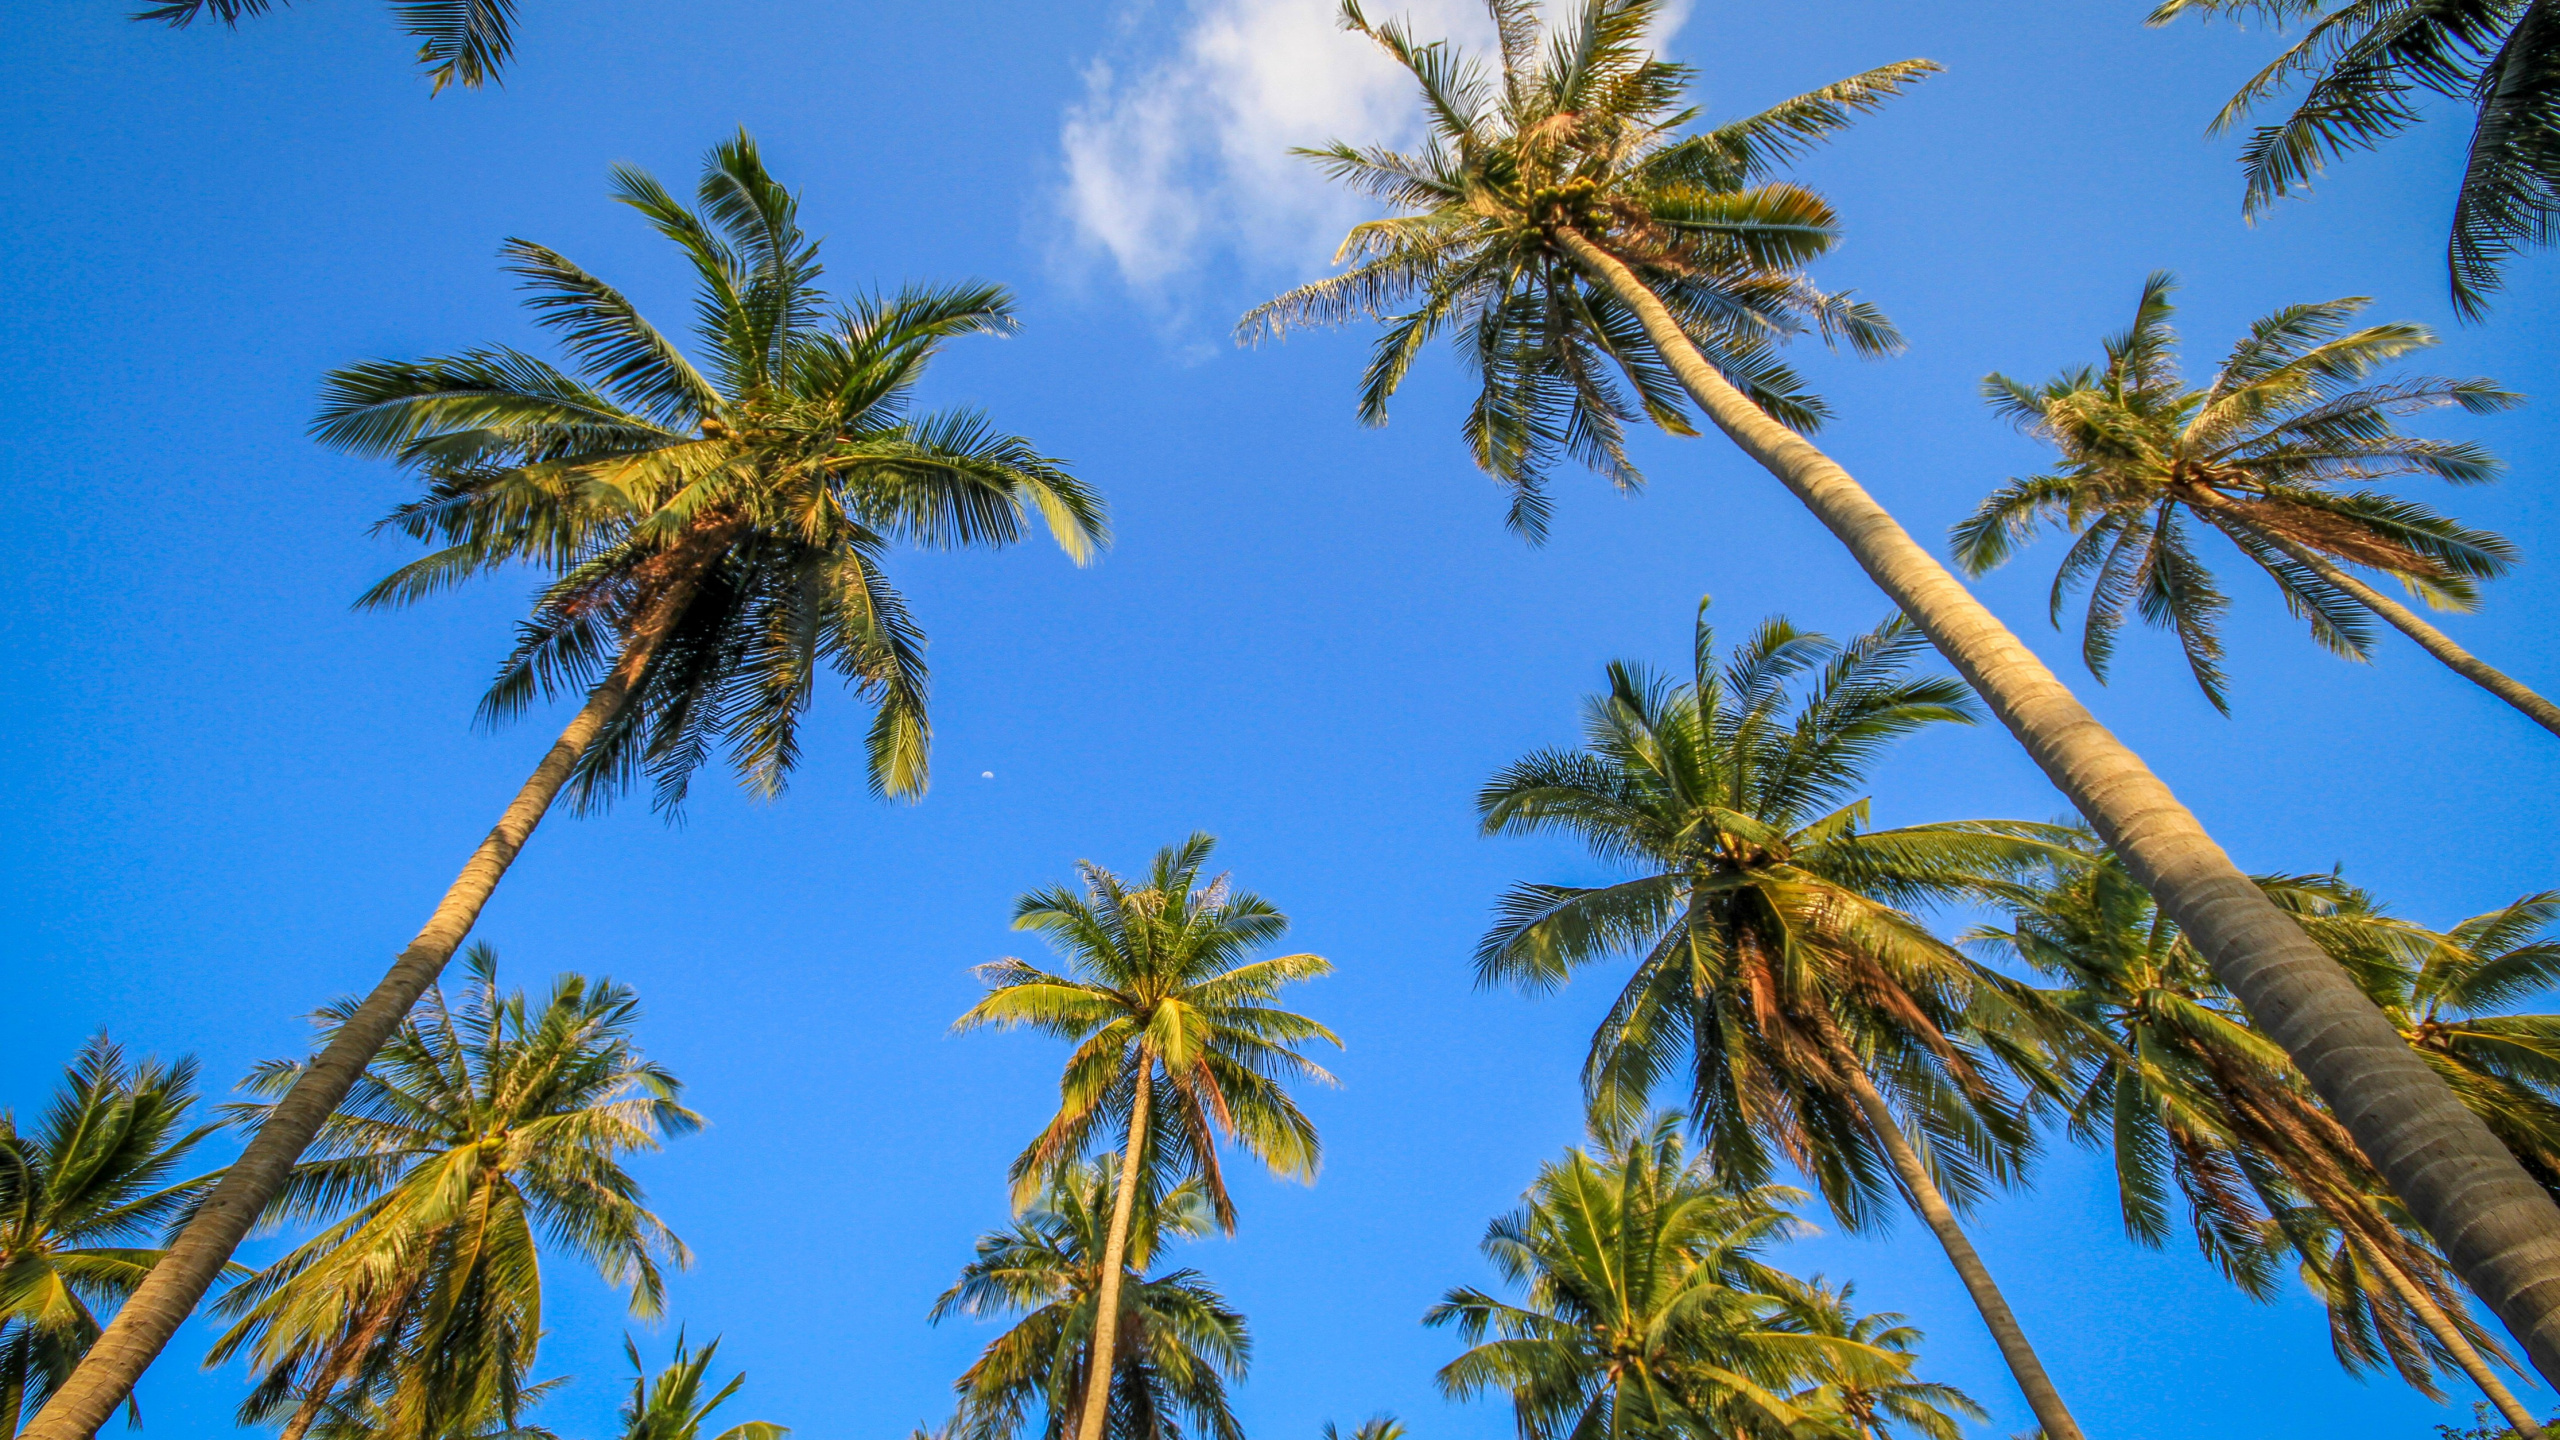 Green Palm Tree Under Blue Sky During Daytime. Wallpaper in 2560x1440 Resolution